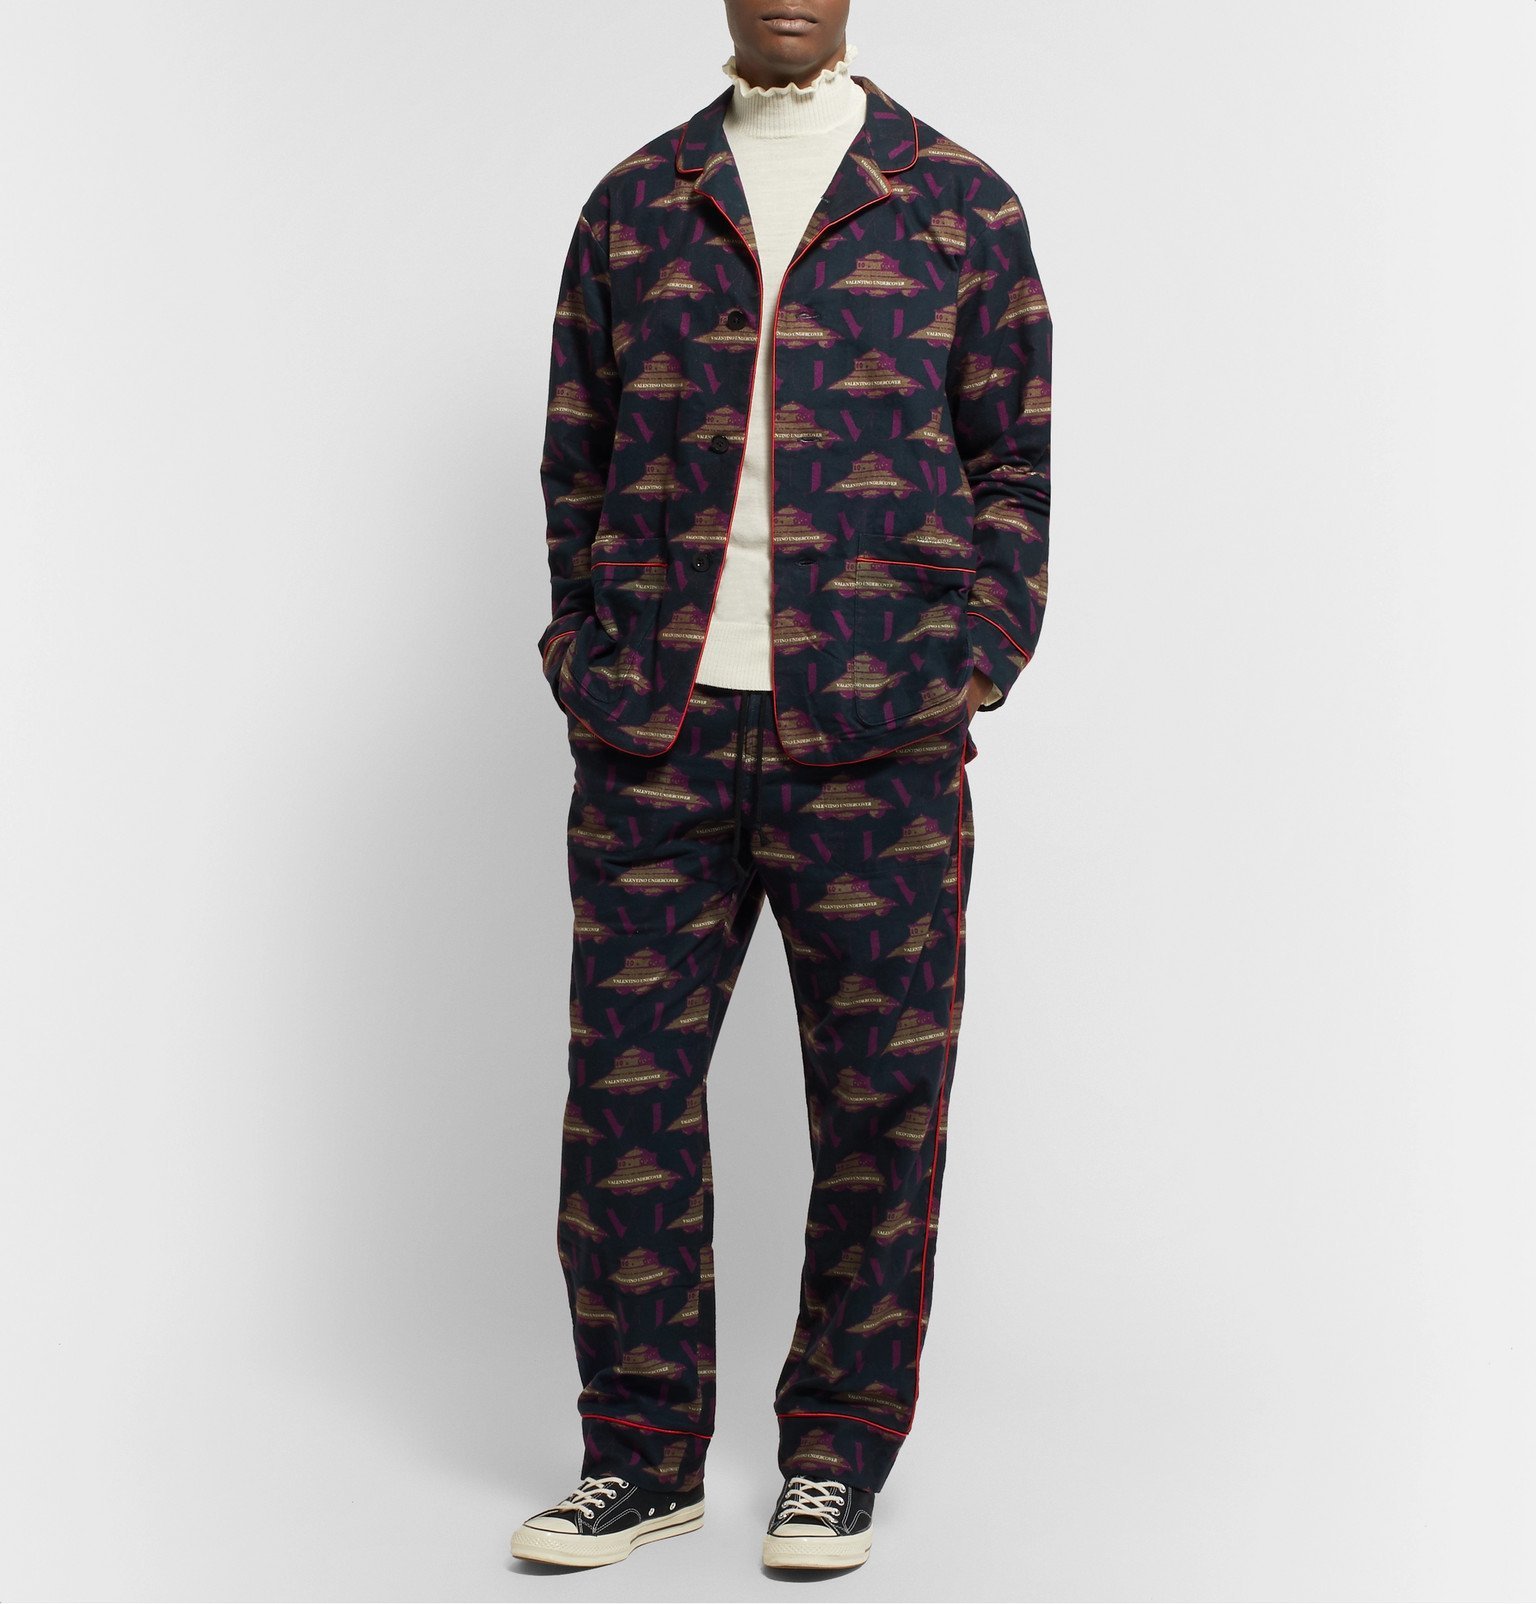 Inconsistent Uitstroom Skim Undercover - Valentino Piped Printed Brushed-Cotton Pyjama Set - Blue  Undercover